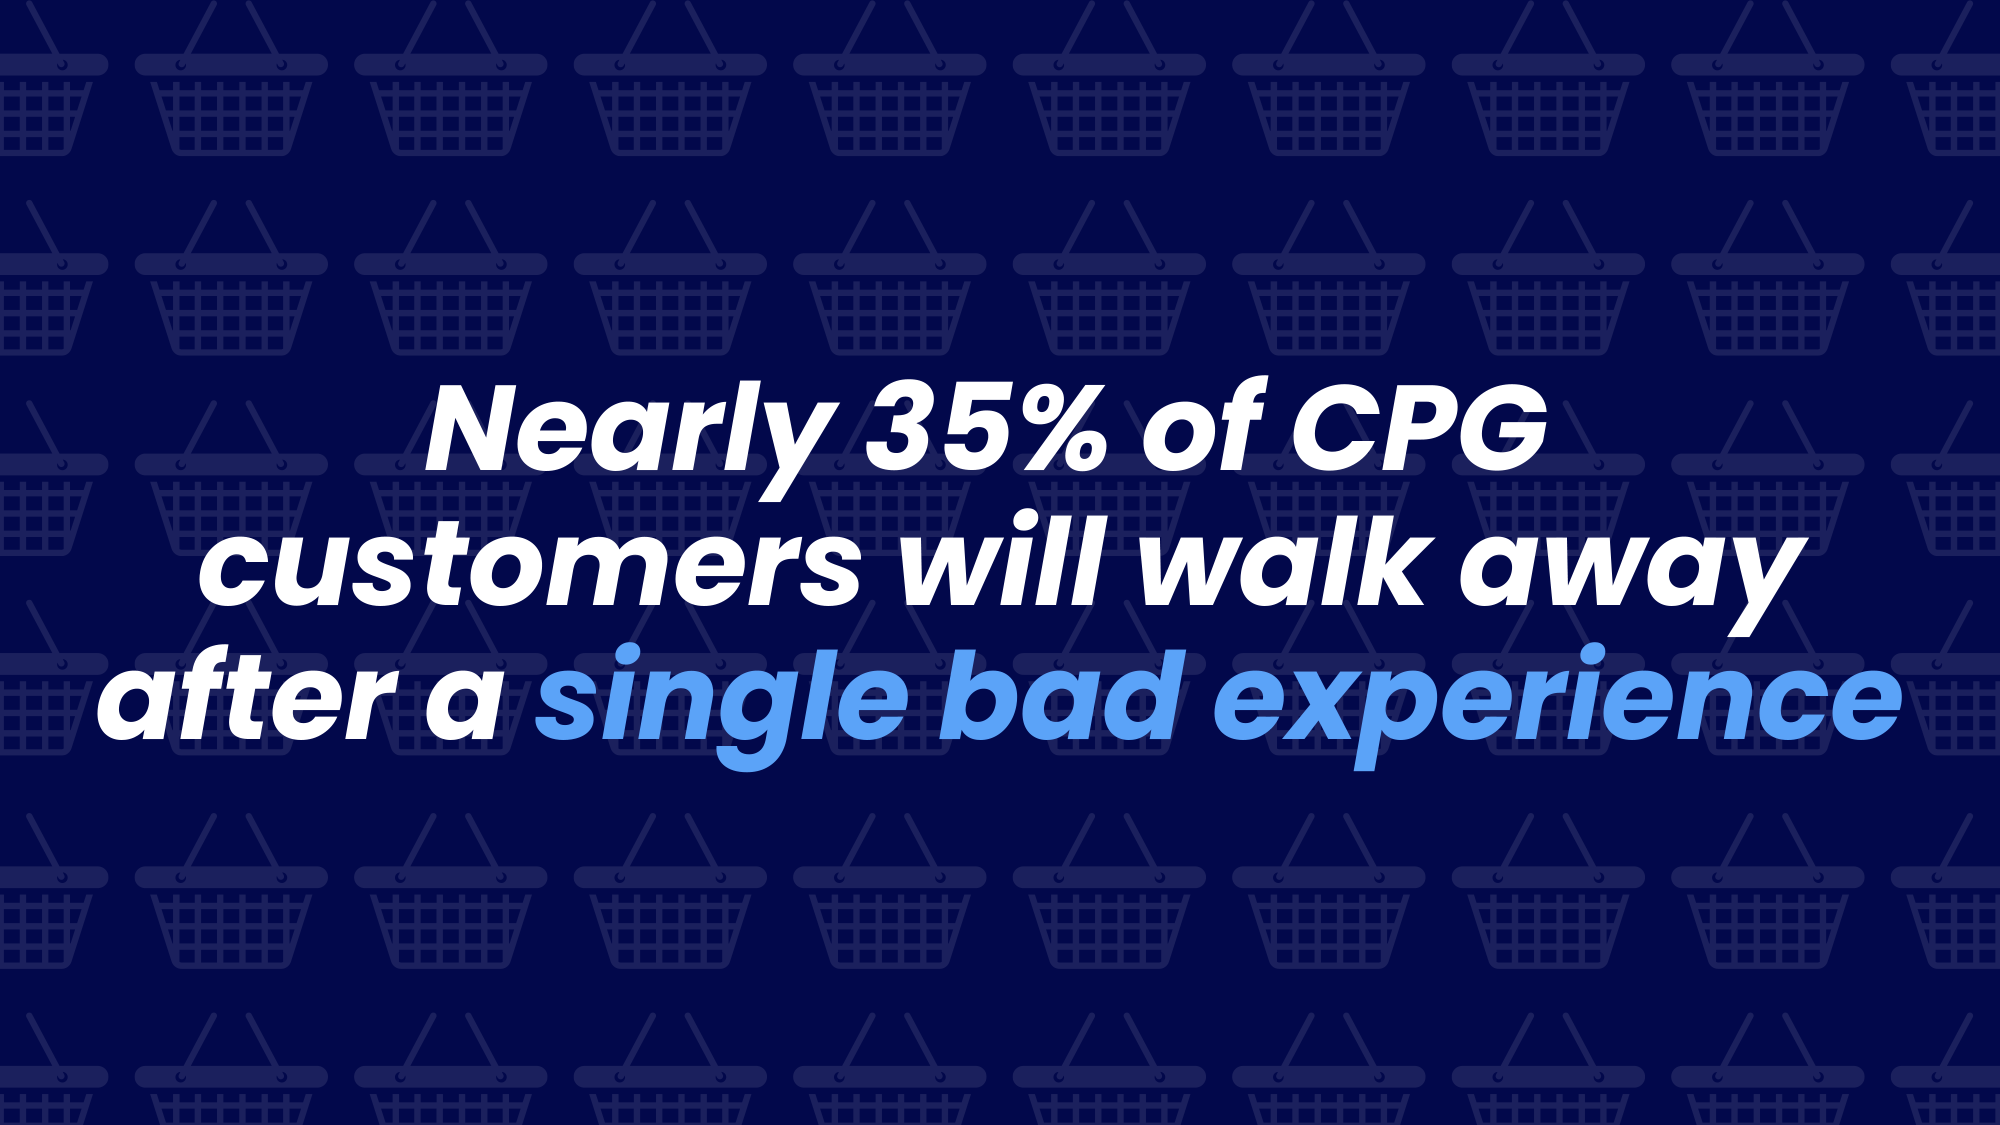 CPG customer experience stat